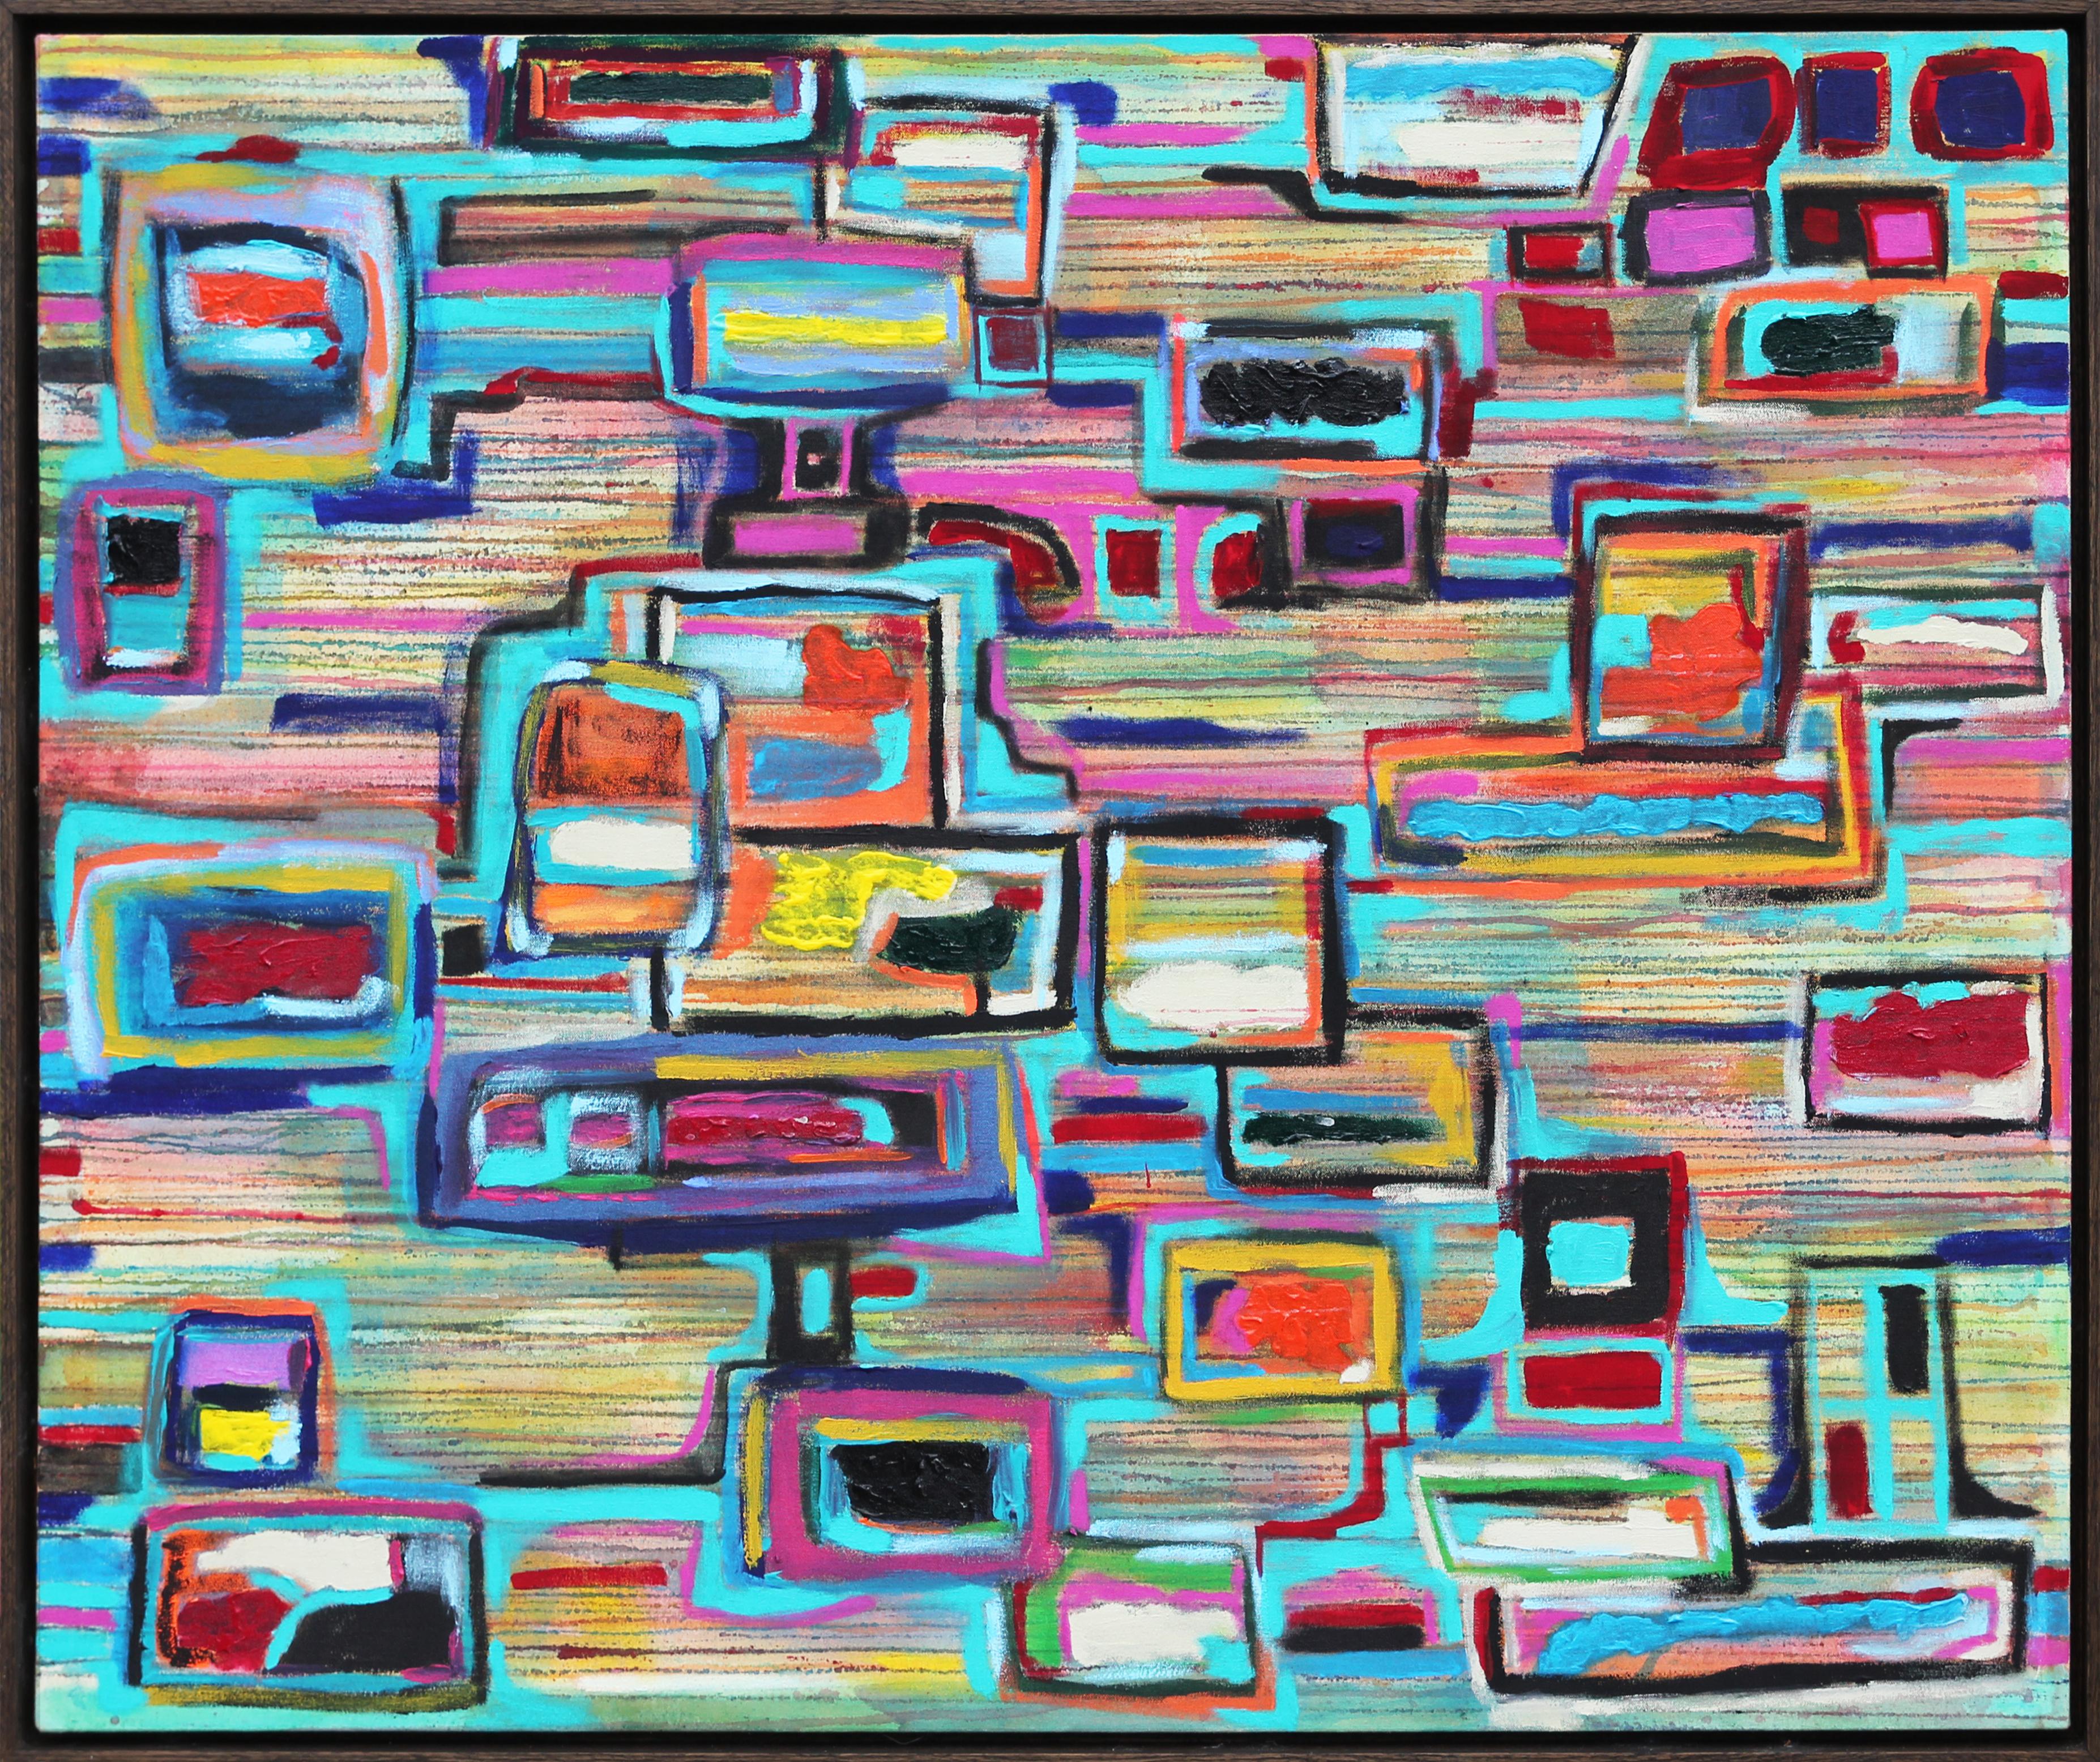 Paul Reeves Landscape Painting - "Static Conundrum" Contemporary Teal, Green, & Pink Abstract Cubist Painting